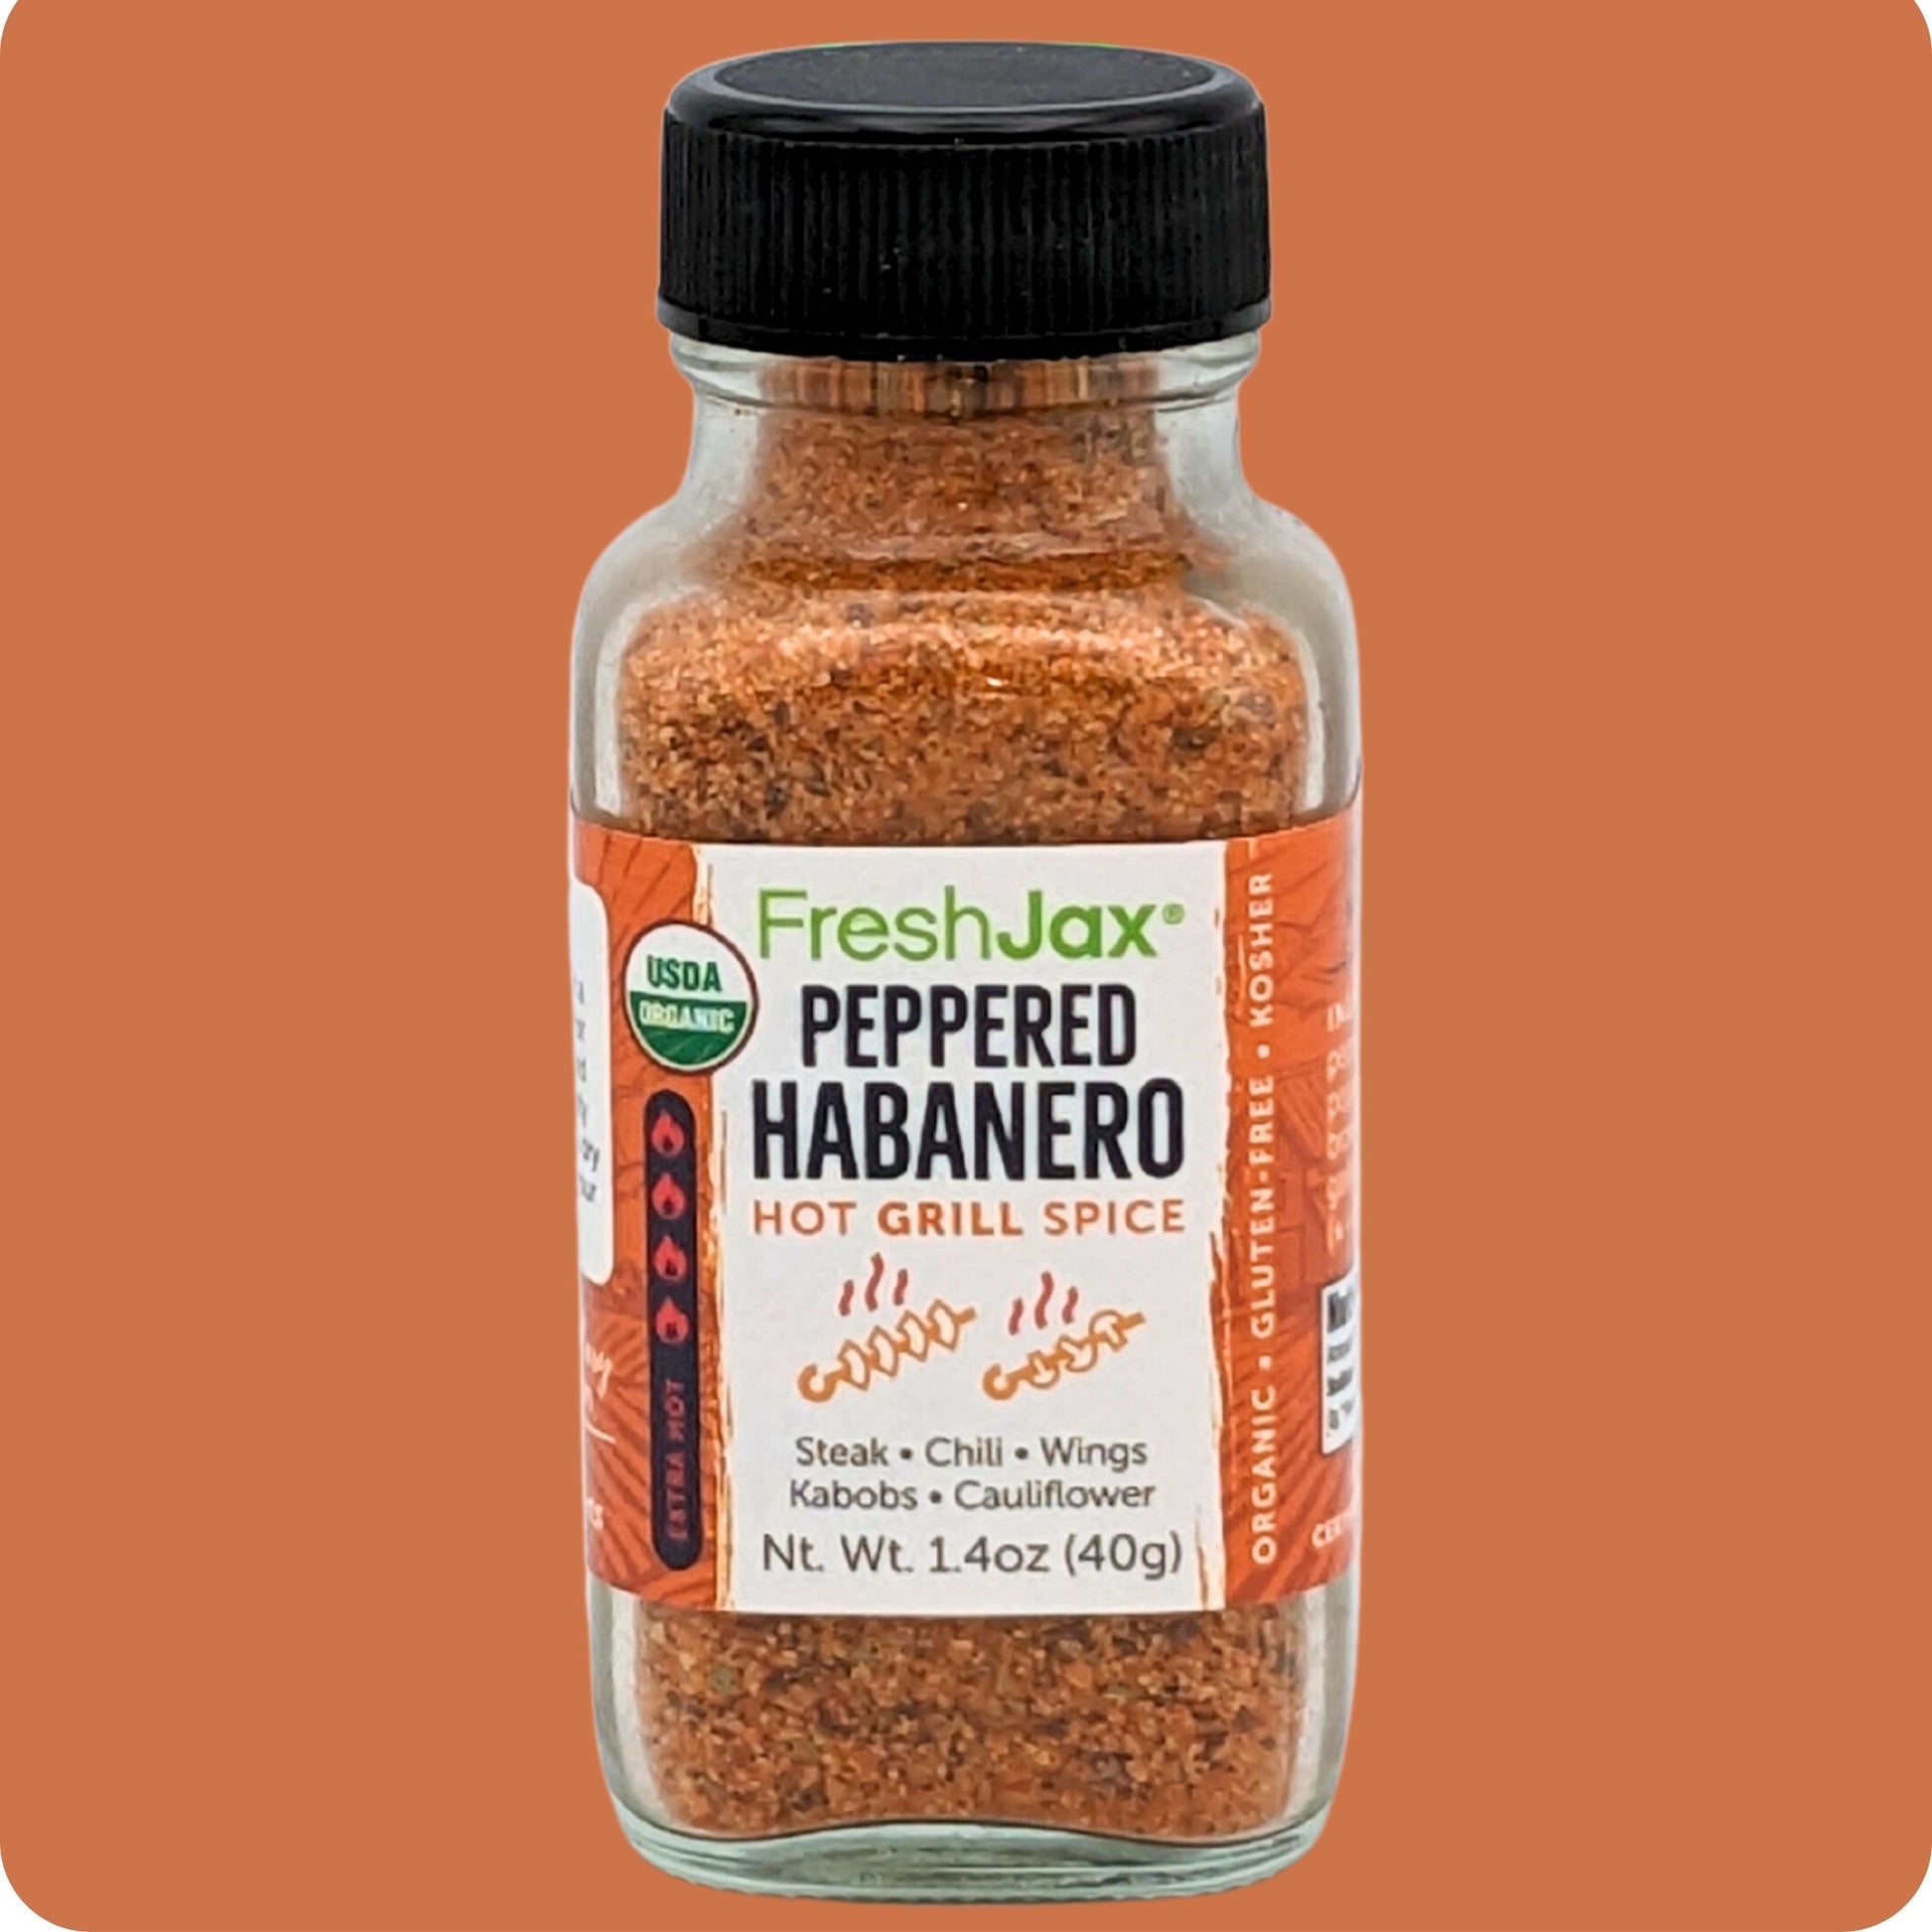 Sampler Sized Peppered Habanero Hot Grill Spice